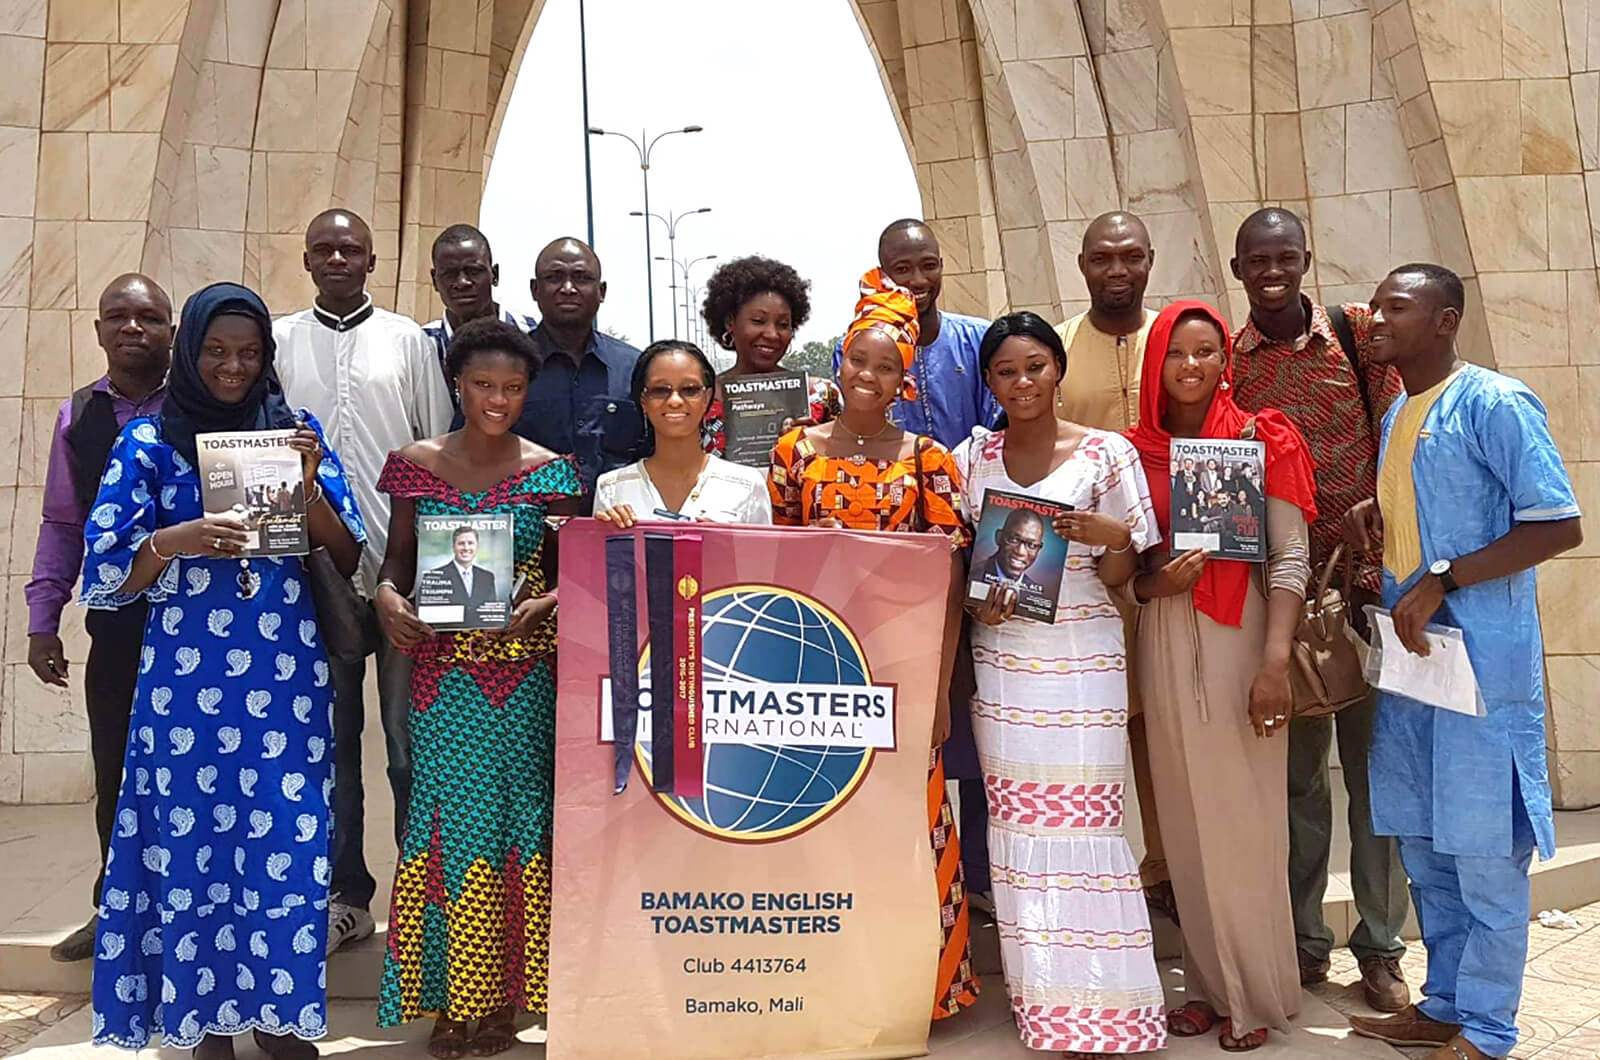 Bamako English Toastmasters club members gather under the Place de l'indépendance monument in Bamako, Mali.